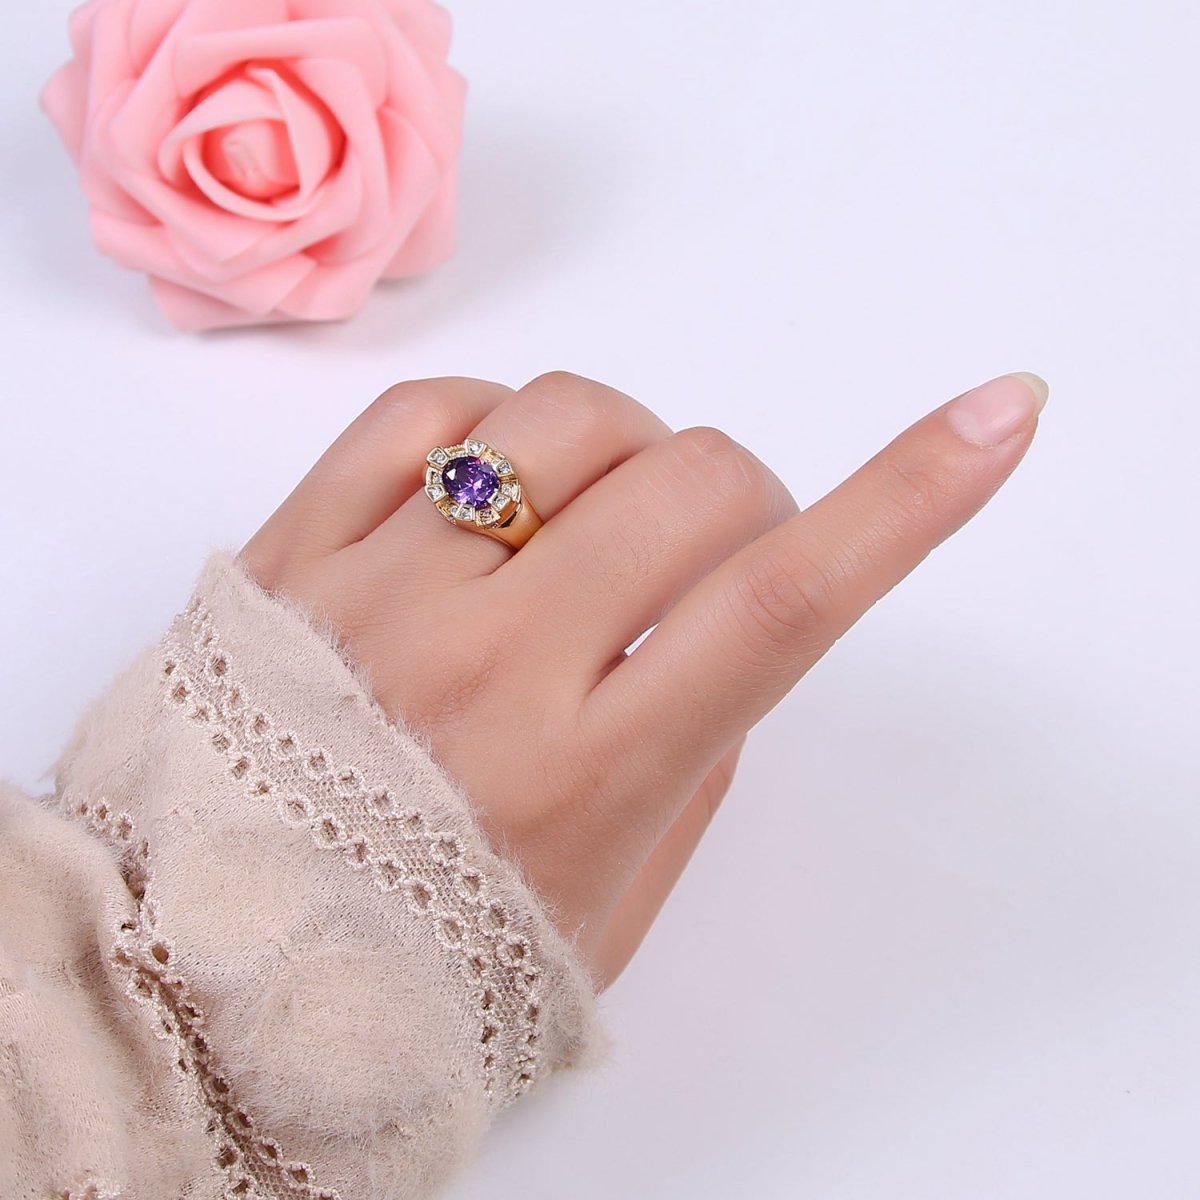 Chunky Dome Sun Ring with Cz Stone Open Adjustable Ring for Statement Jewelry U-374~U-377 - DLUXCA